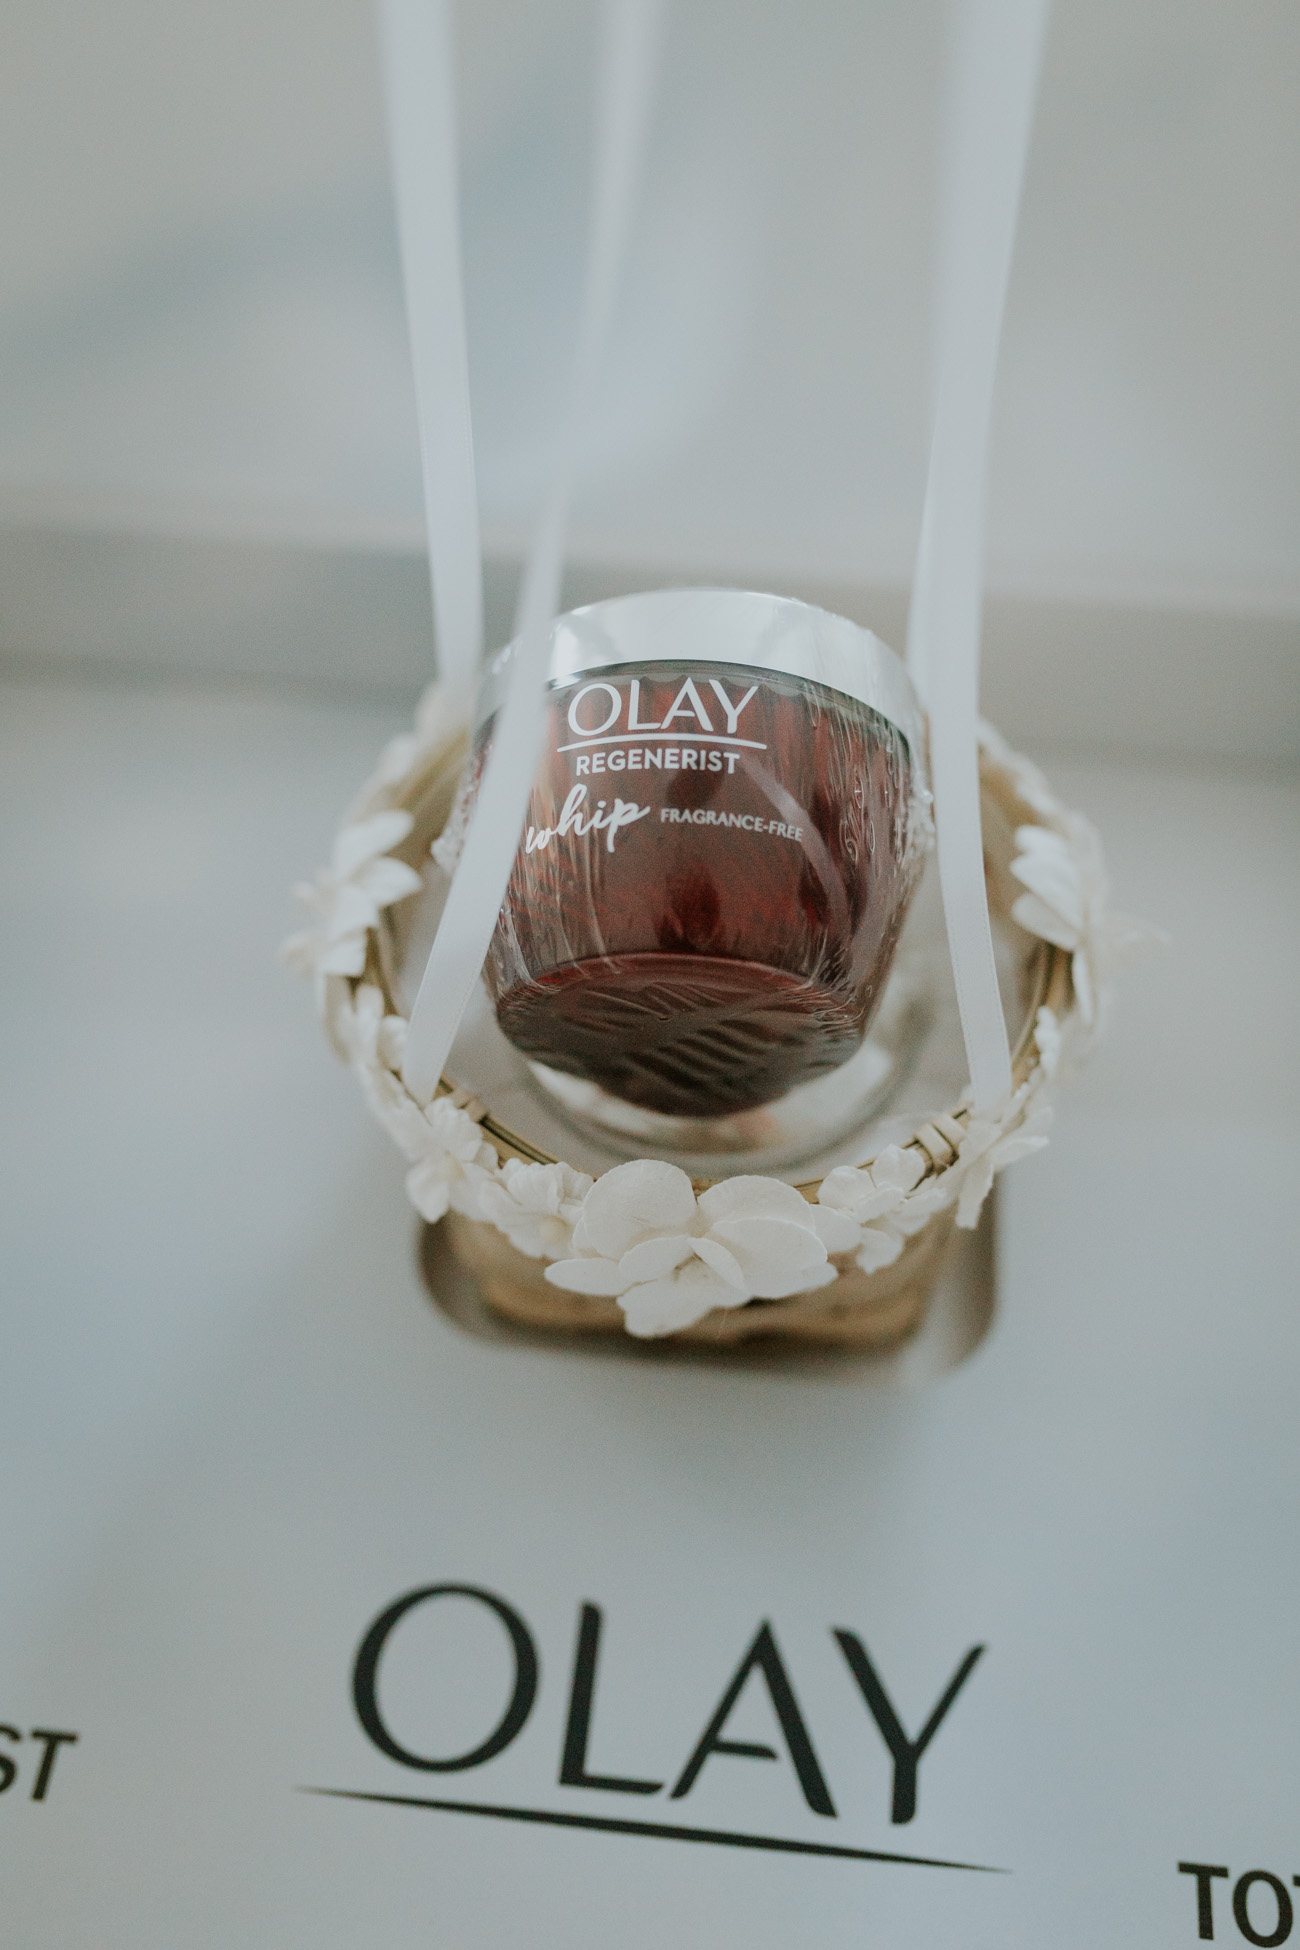 how to relieve dry skin, olay whips, olay regenerist, olay total effect cream, olay moisturizer, olay fragrance free, best facial moisturizers, how to keep your face moisturized, beauty tips // grace white a southern drawl